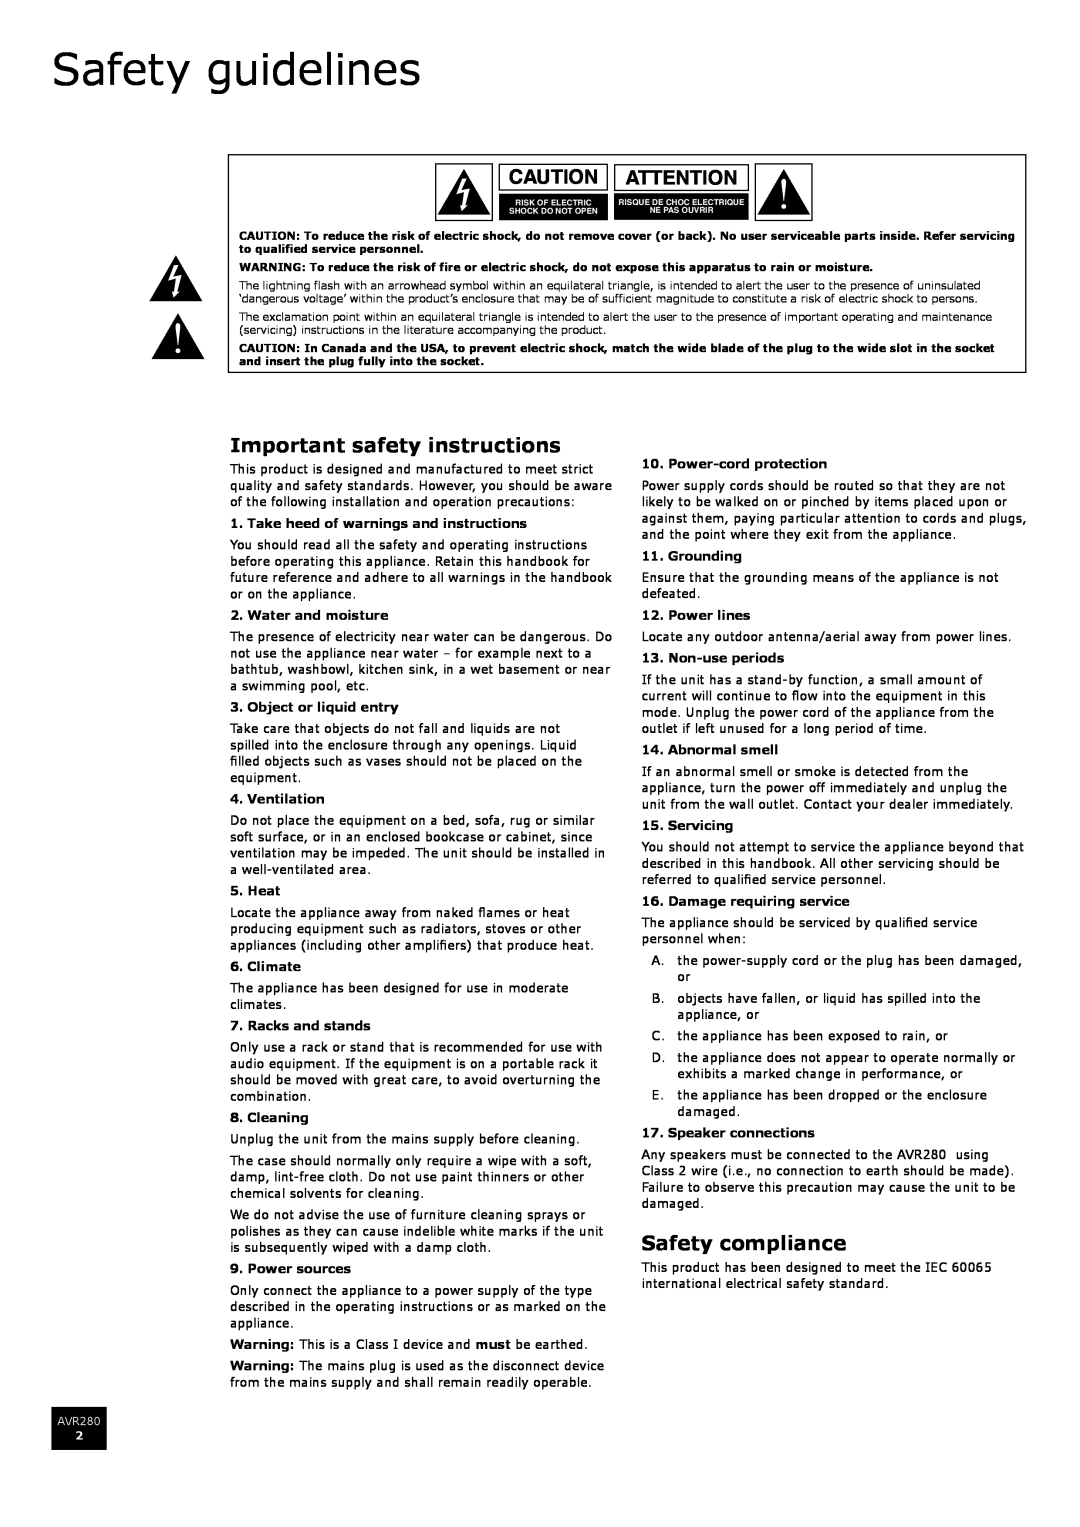 Arcam AVR280 manual Safety guidelines, Important safety instructions, Safety compliance, Caution Attention 